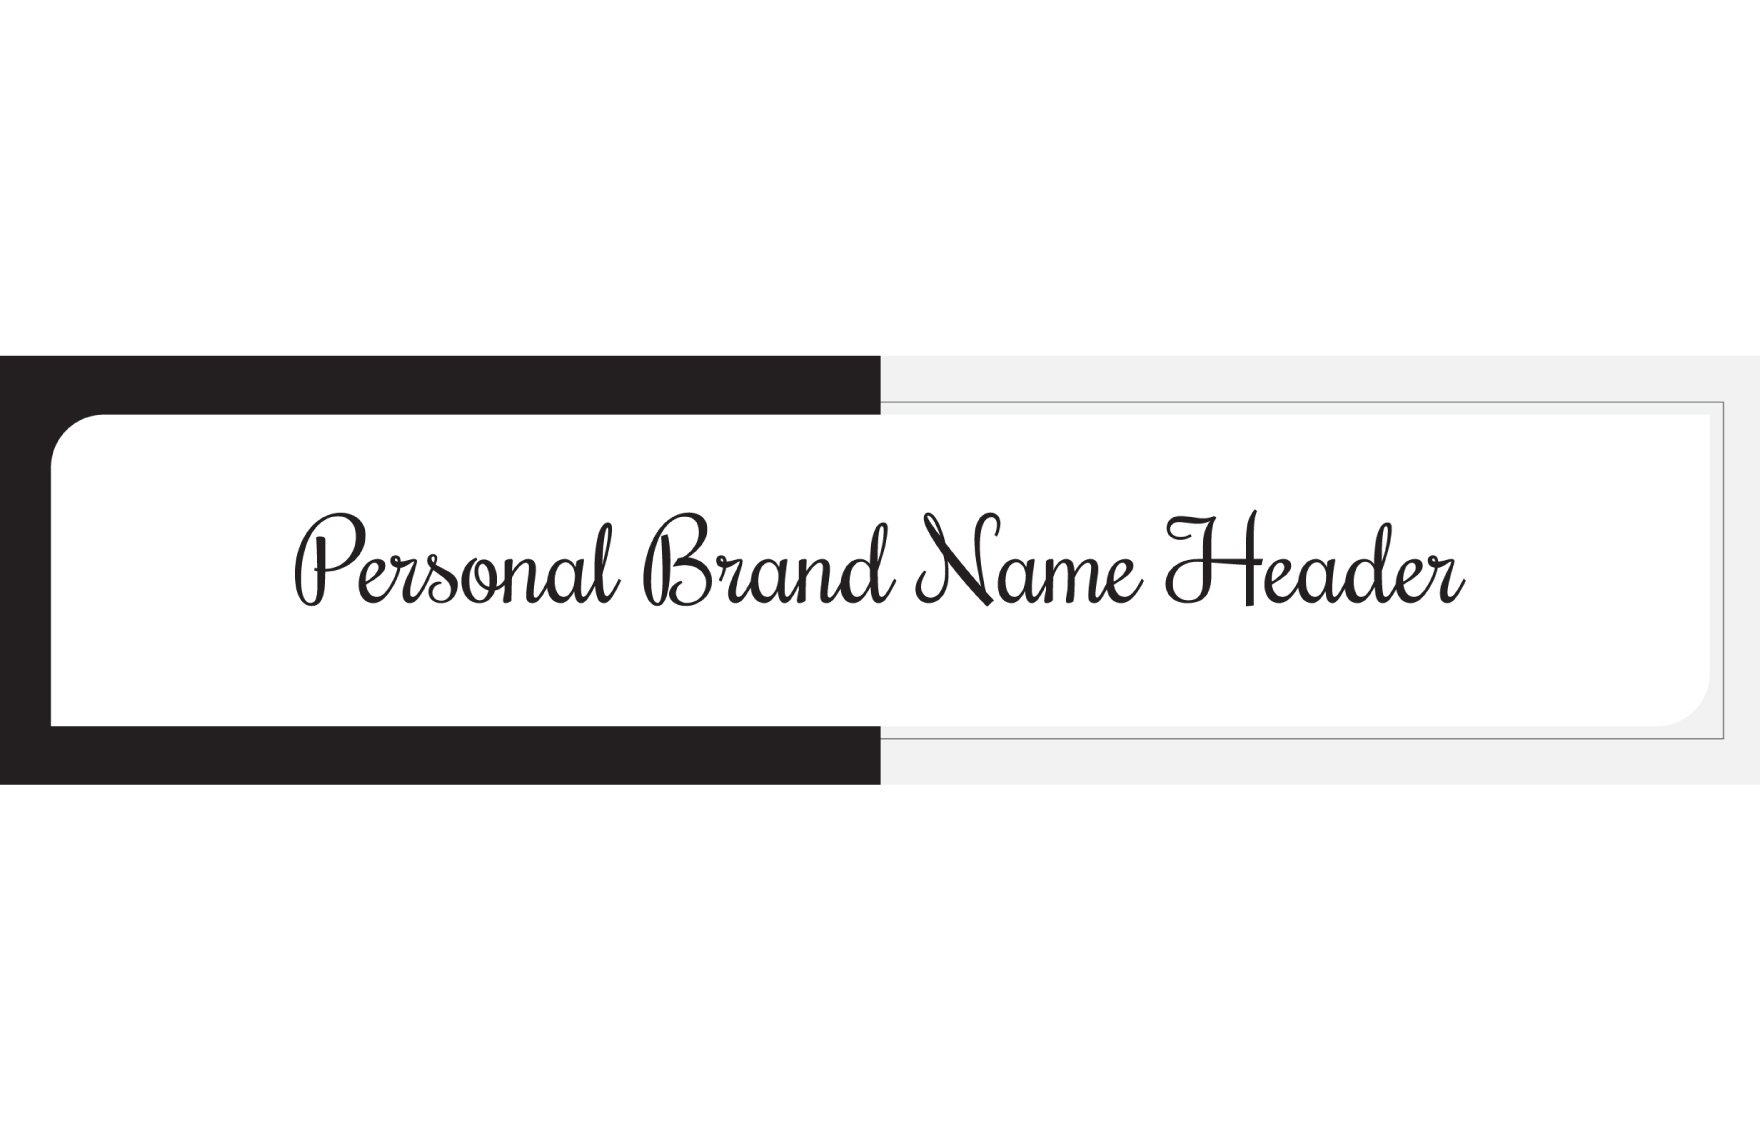 Personal Brand Name Header